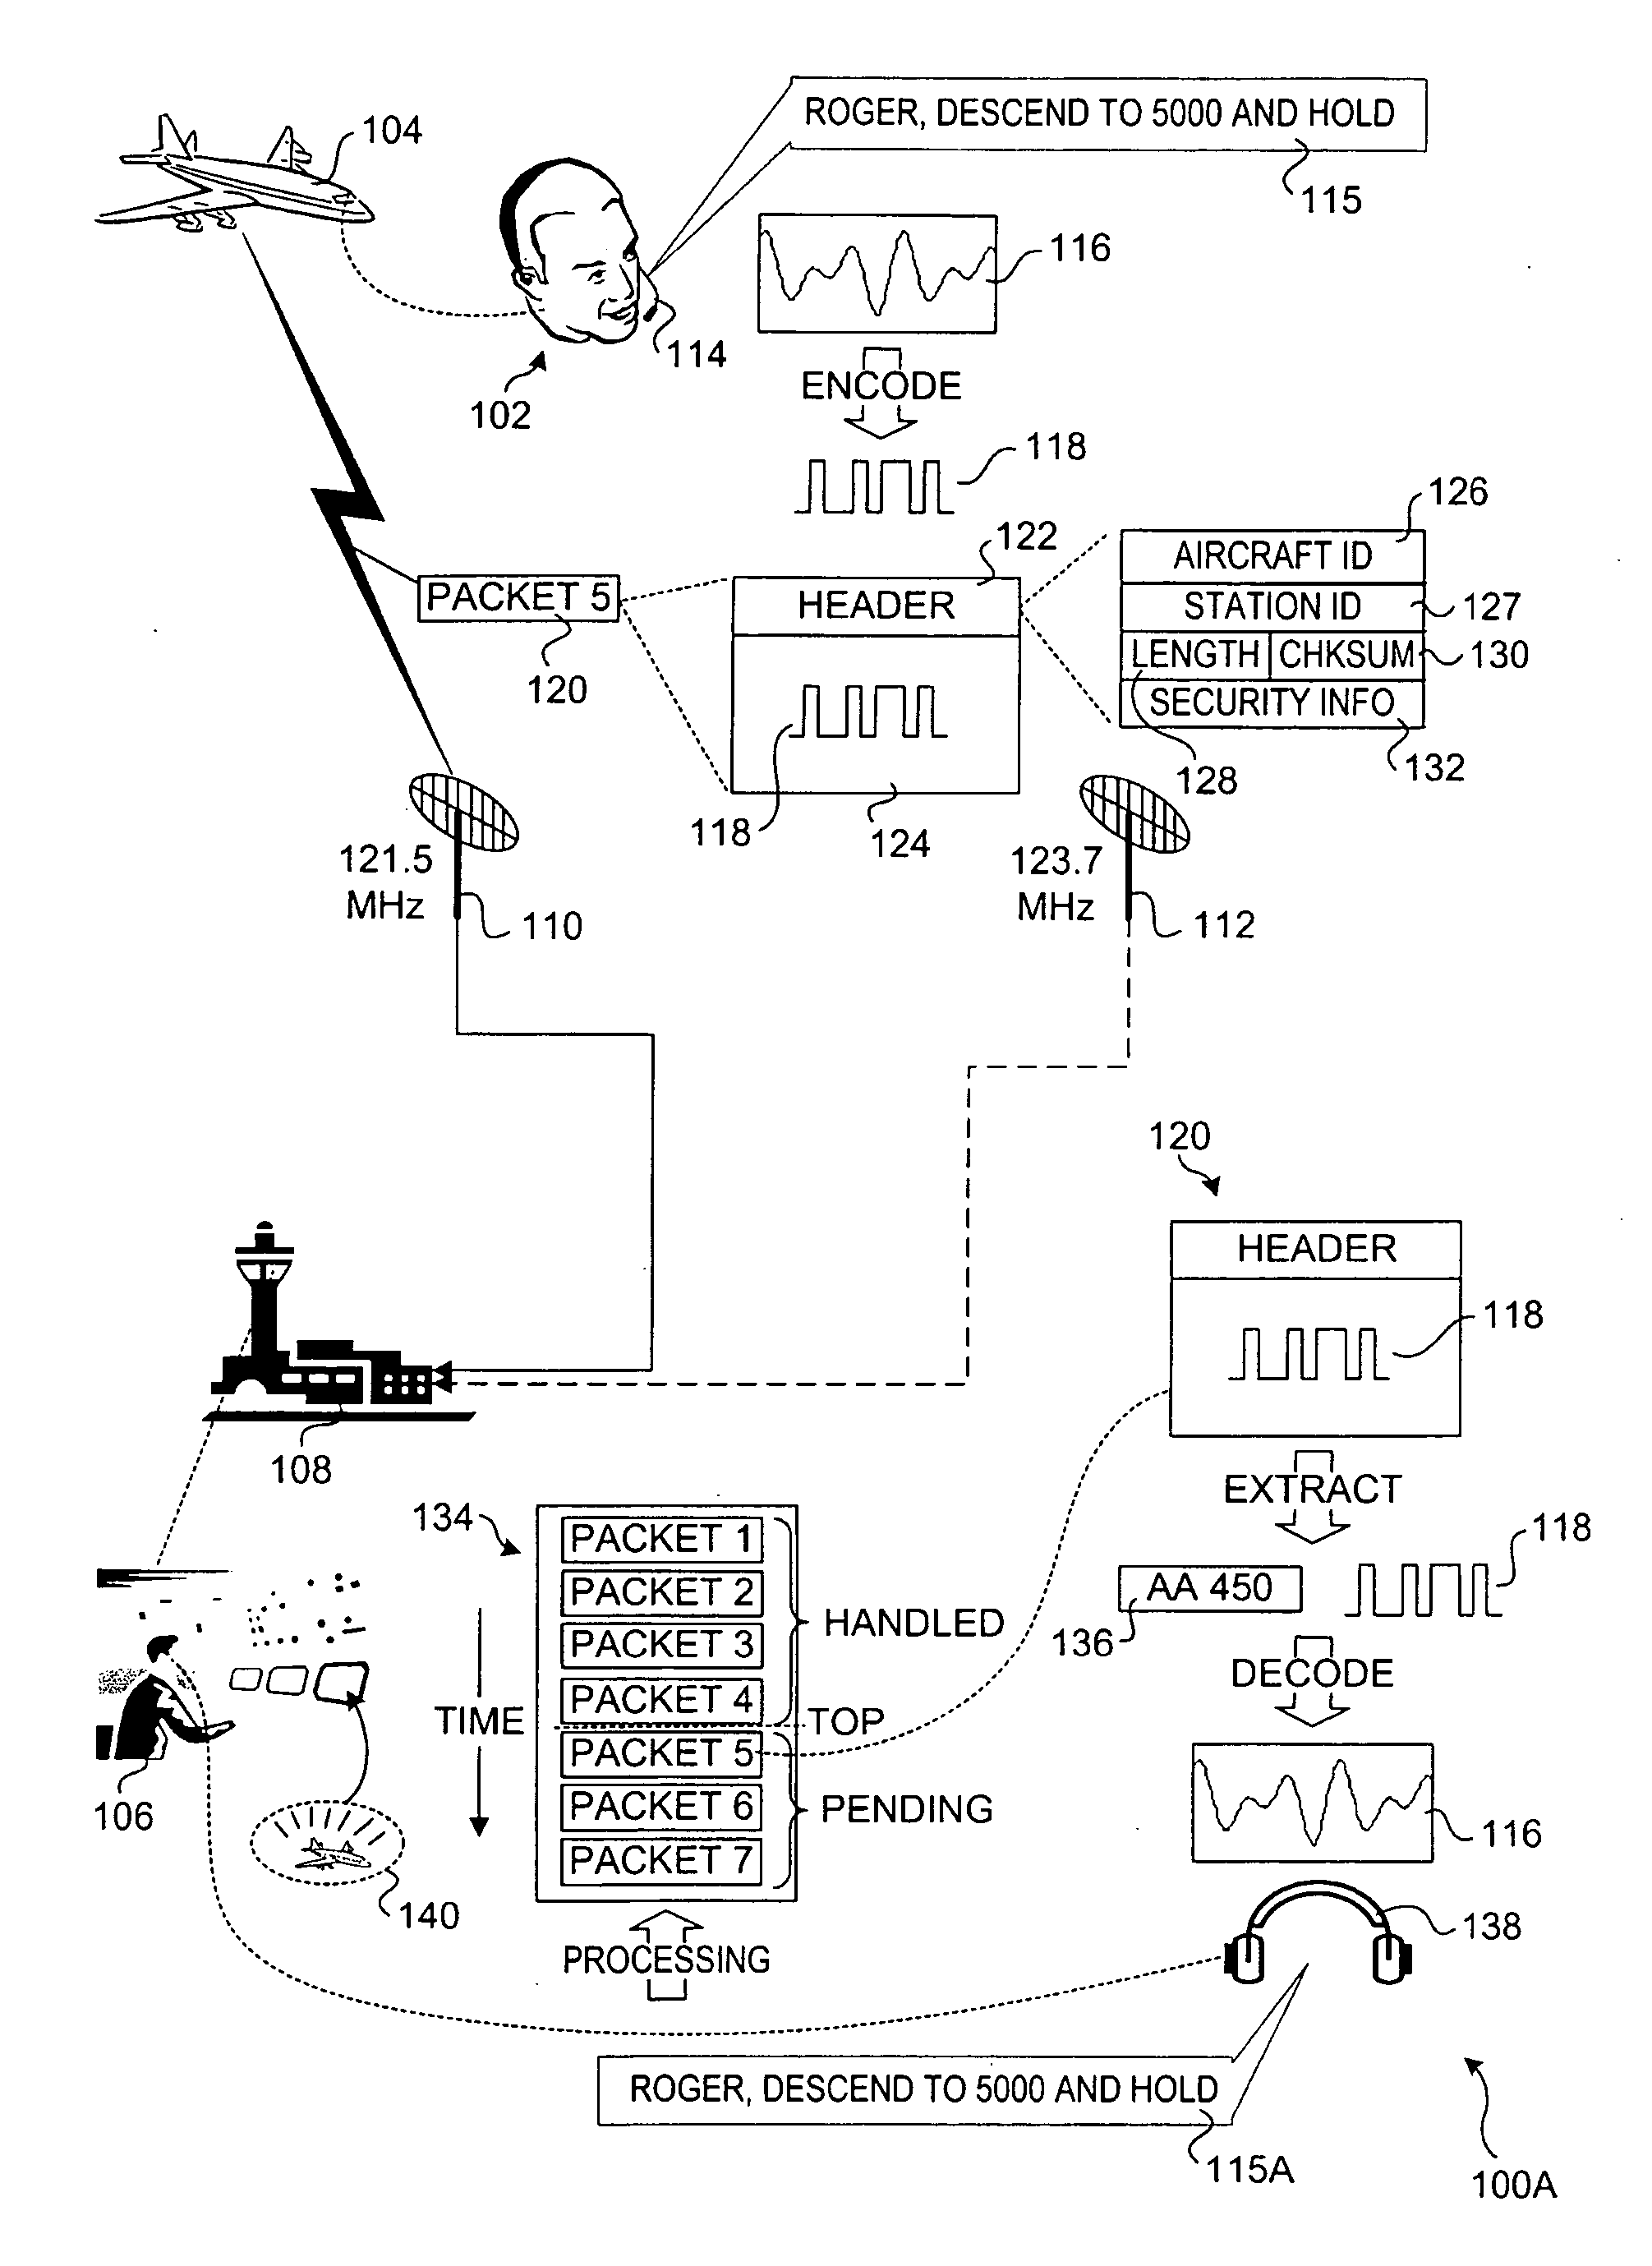 Packetized voice communication method and system